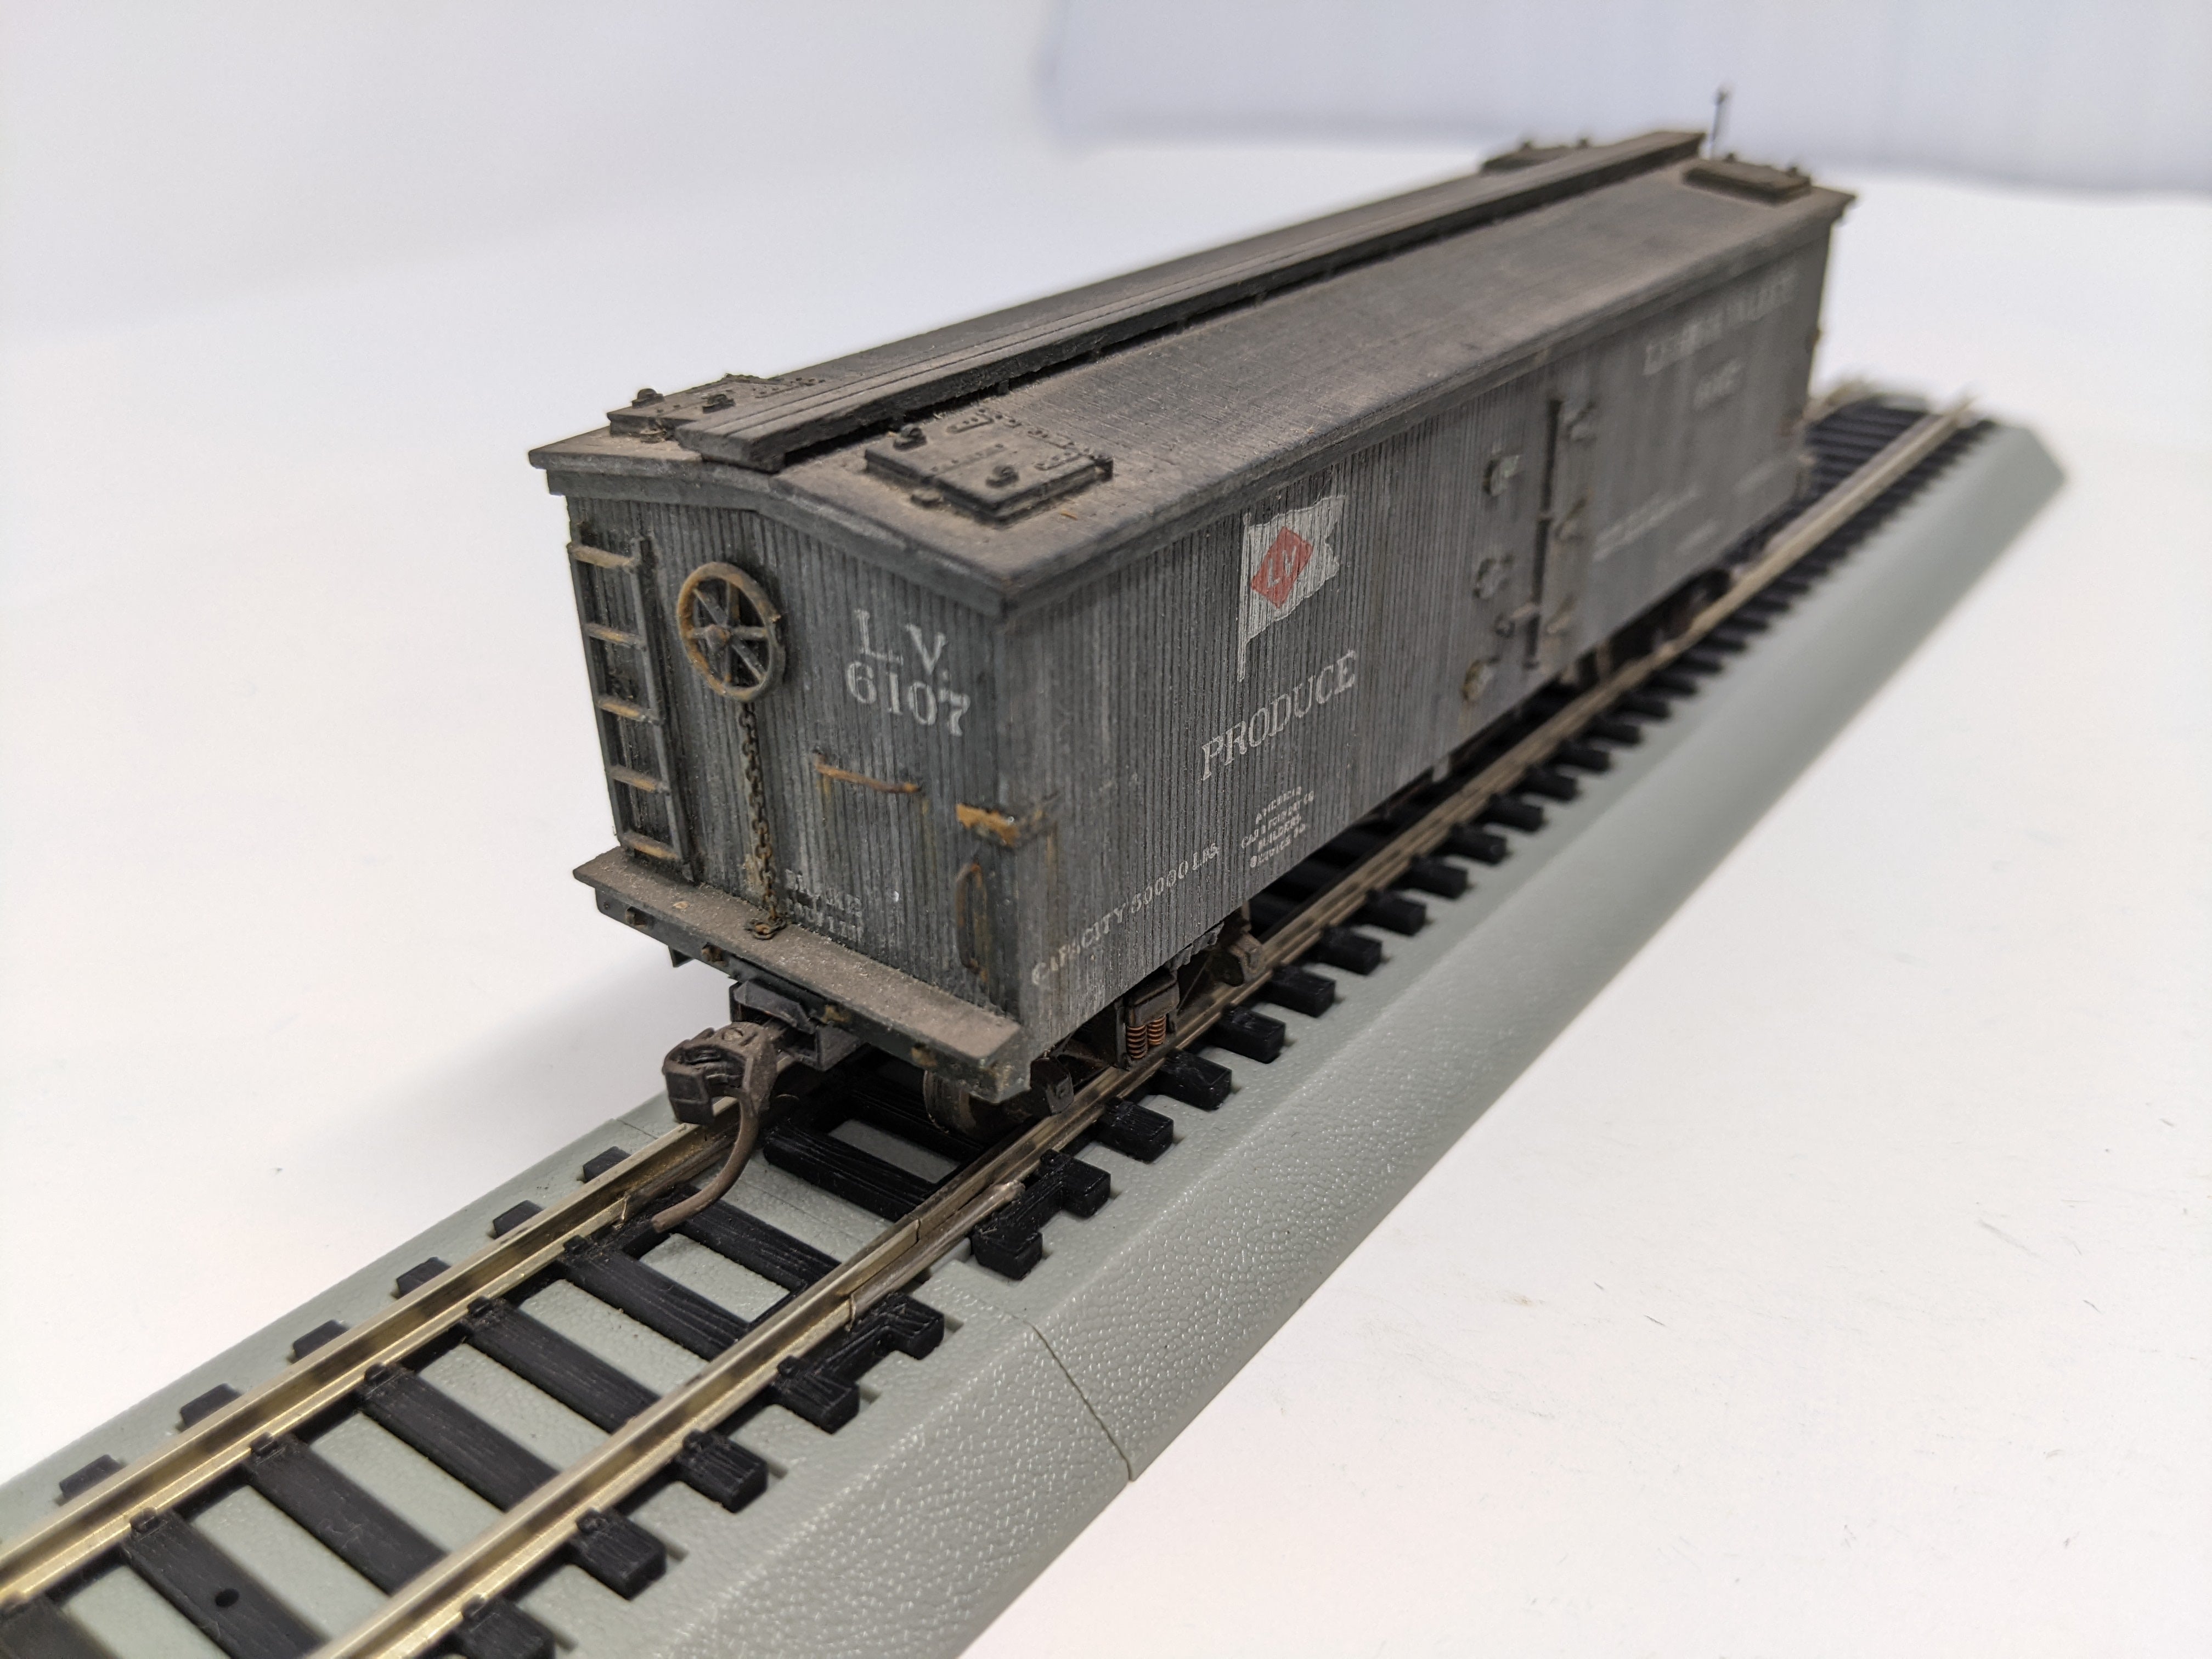 USED HO Scale, Oldtime 35' Wooden Reefer, Lehigh Valley #6017, Read Description